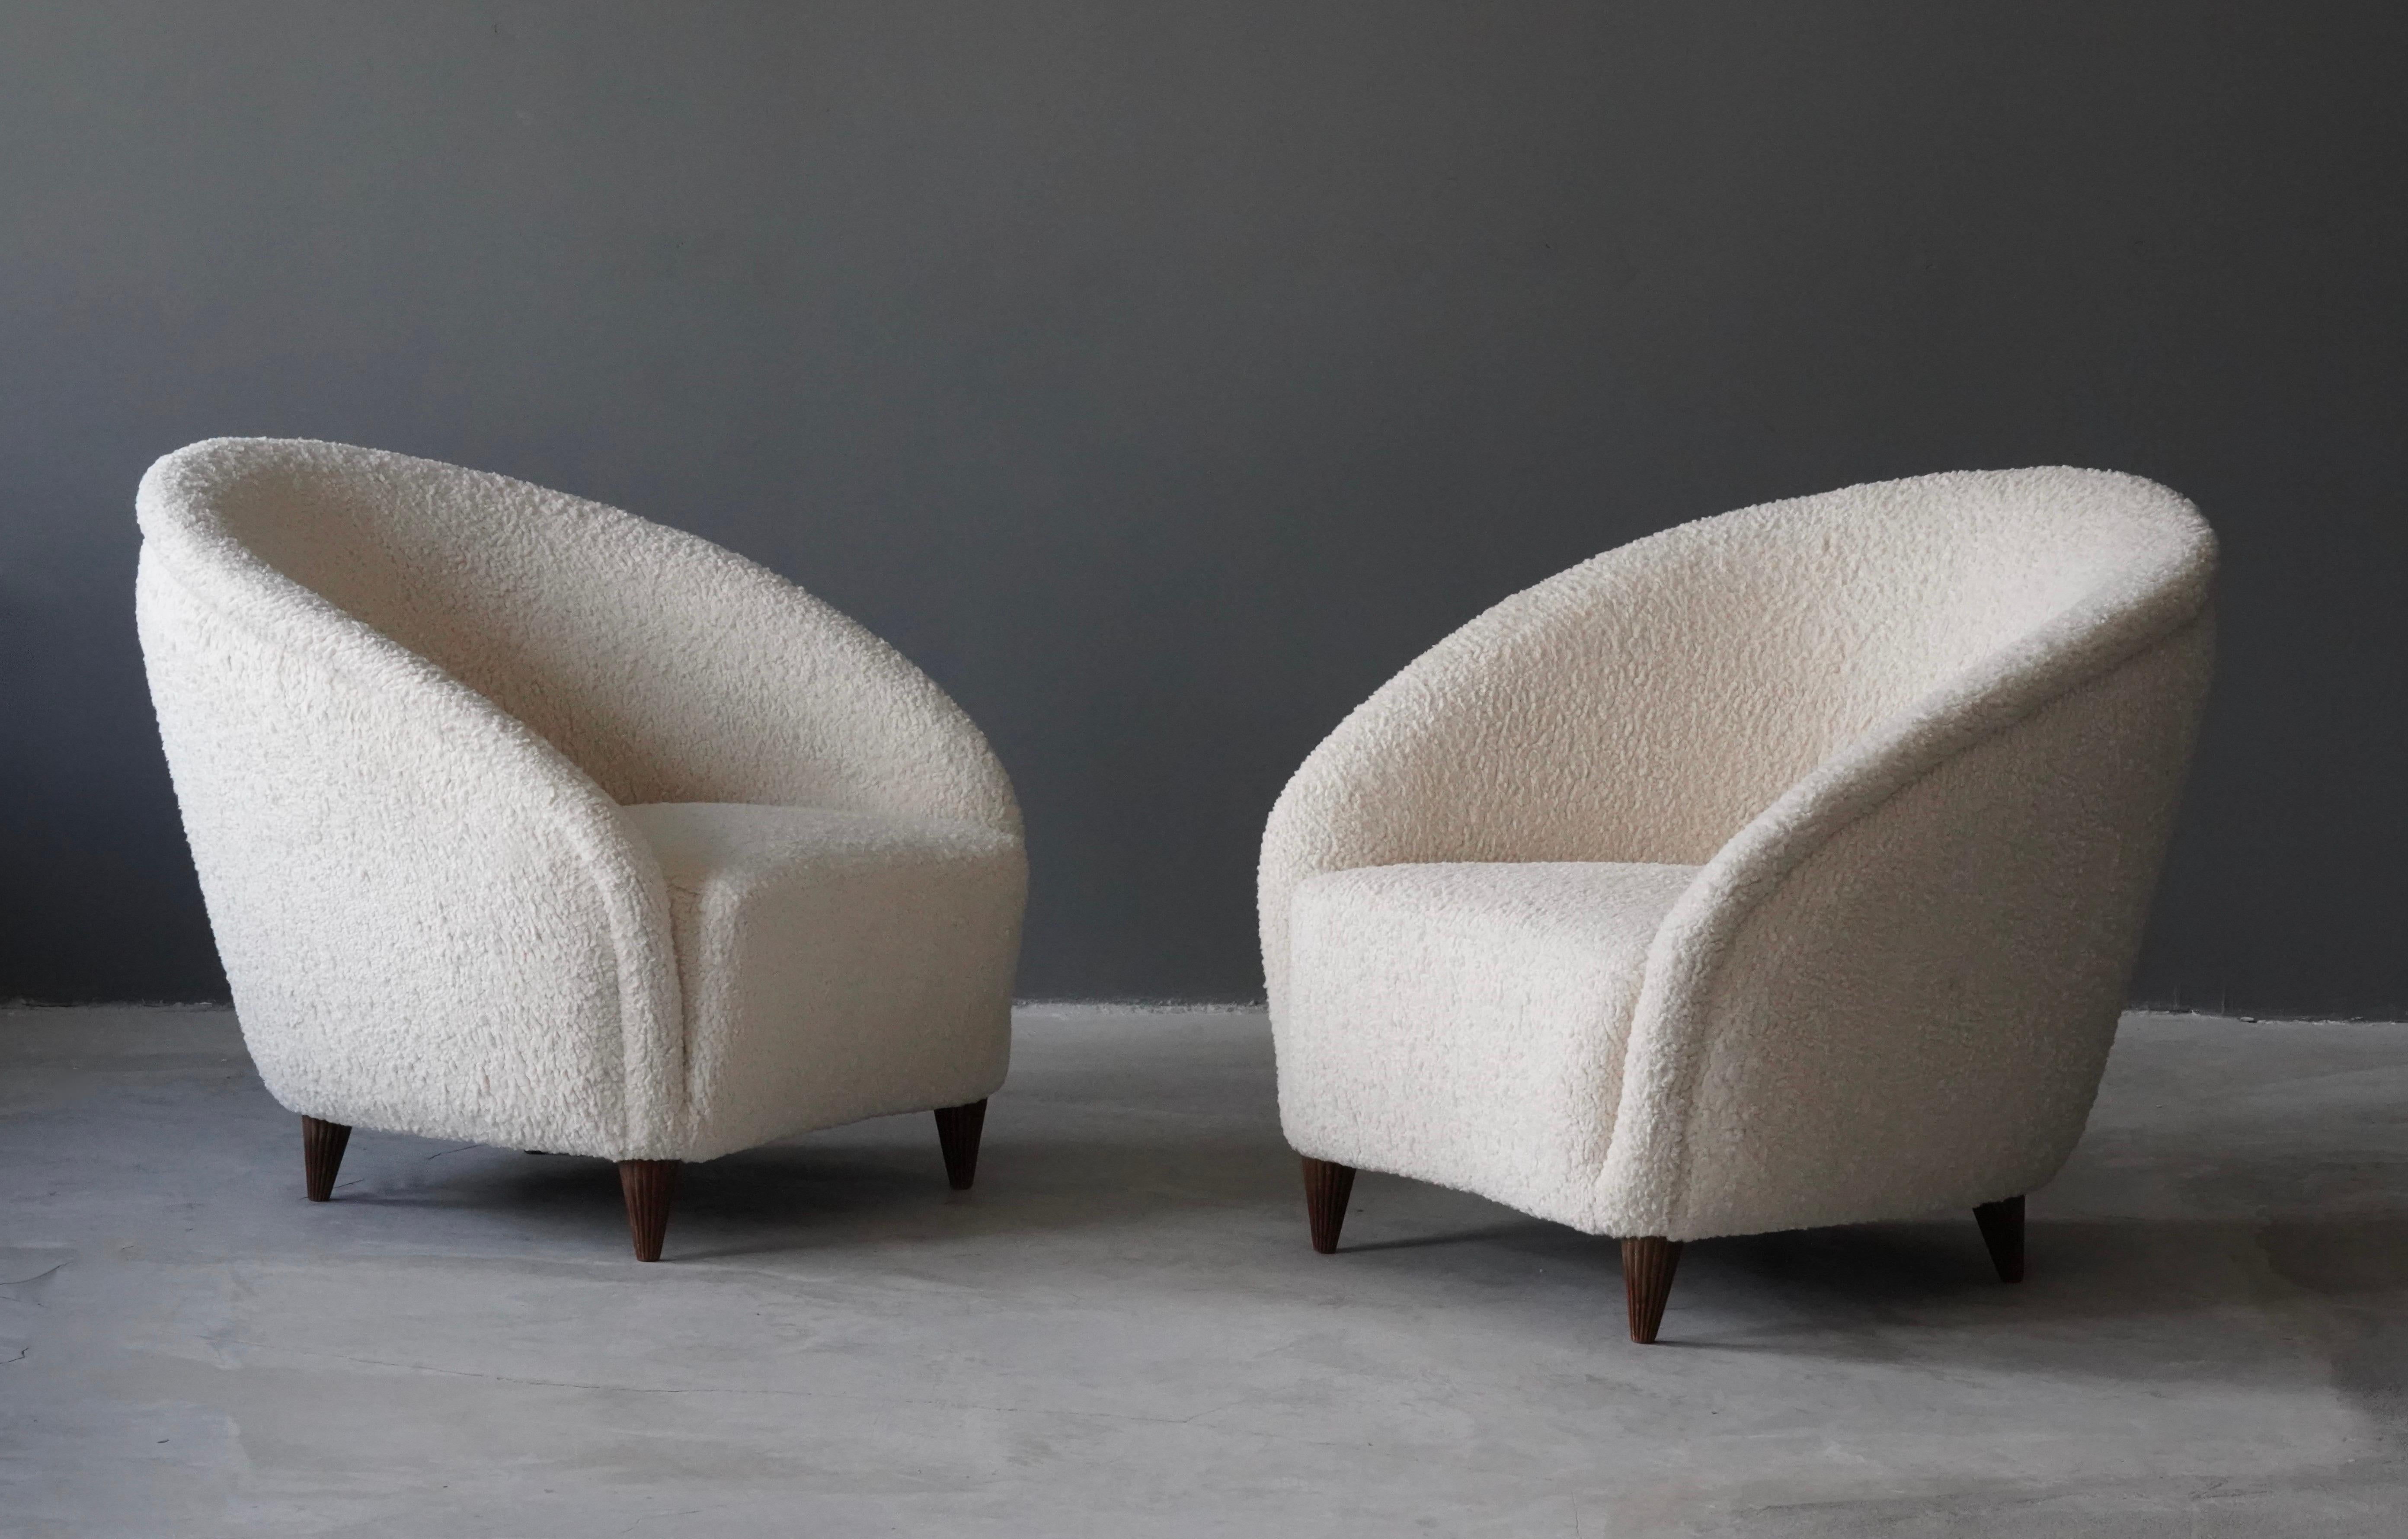 Organically shaped lounge chairs of intimate scale, design attributed to Gio Ponti. Likely produced by Casa e Giardino in the 1940s. Reupholstered in a high-end white bouclé fabric. Fluted walnut legs with light original patina. 

Gio Ponti is